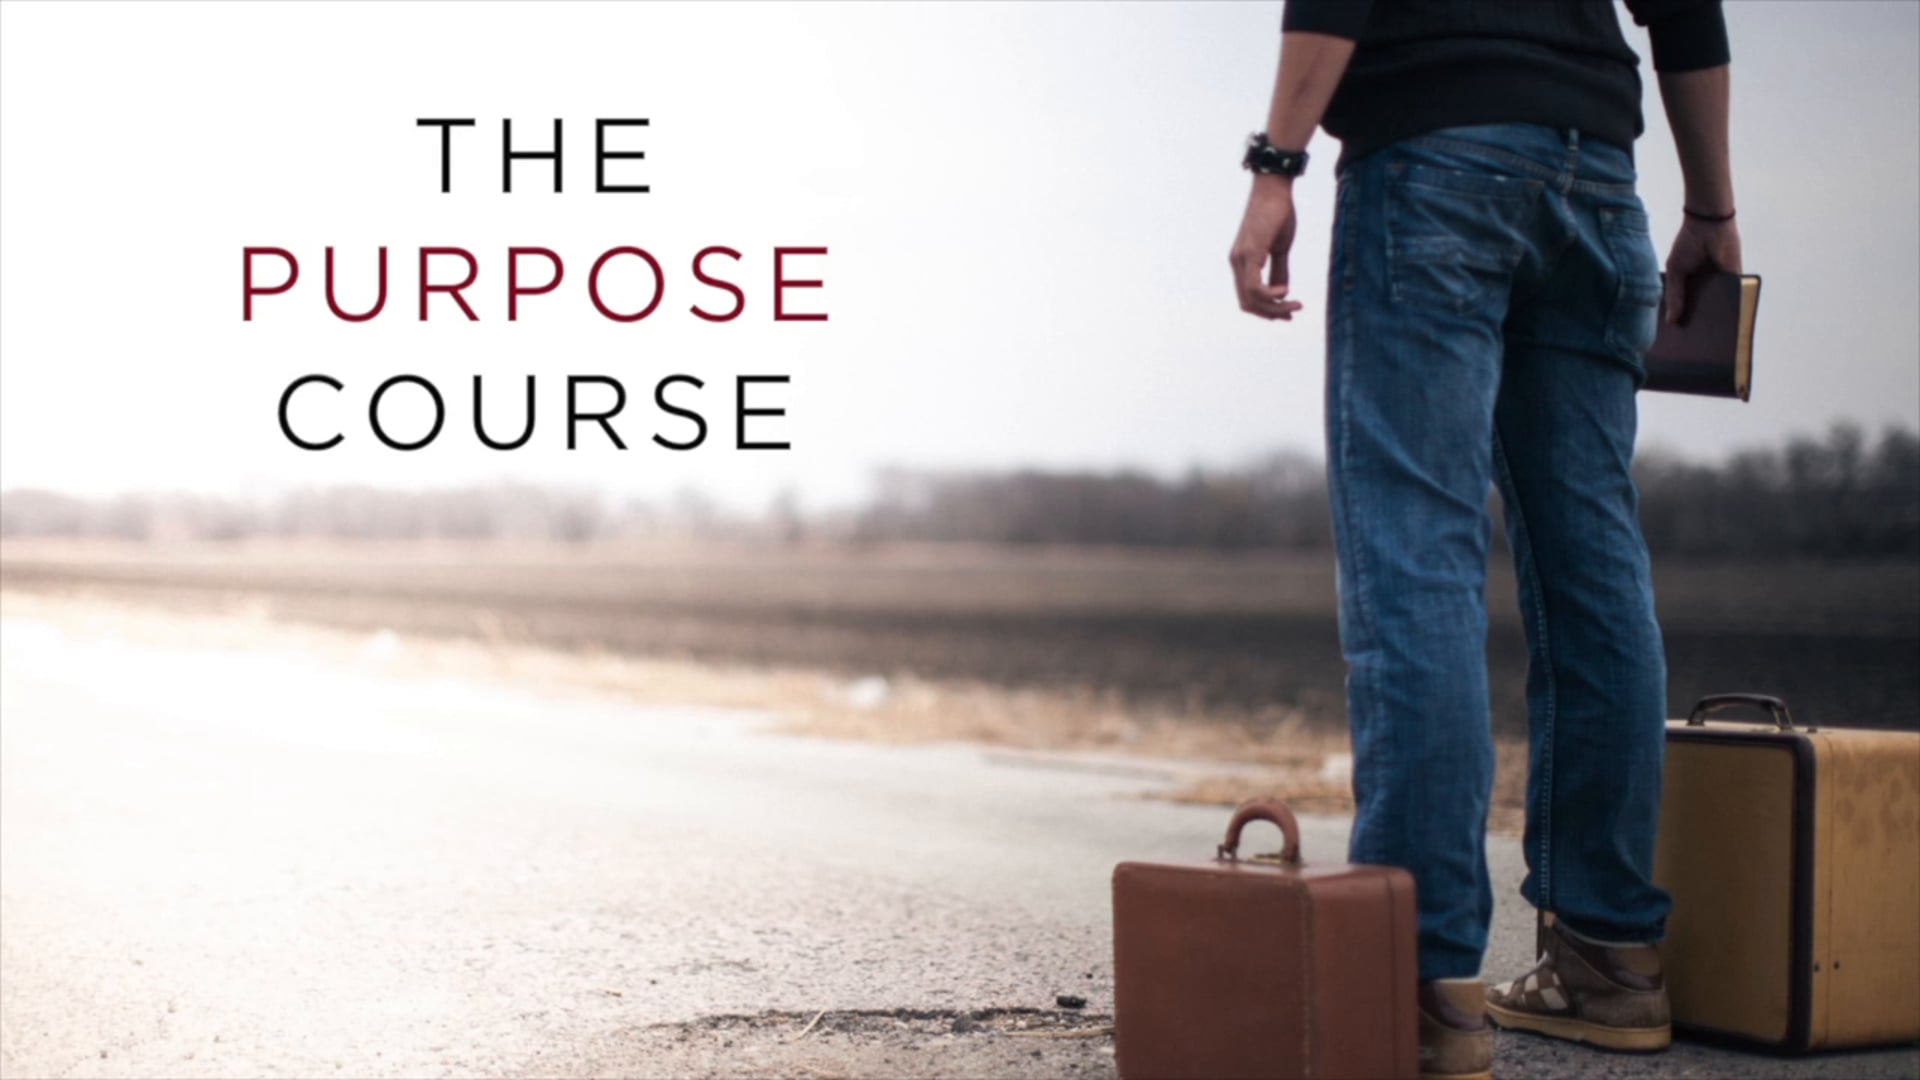 The Purpose Course 2 - GIVEN